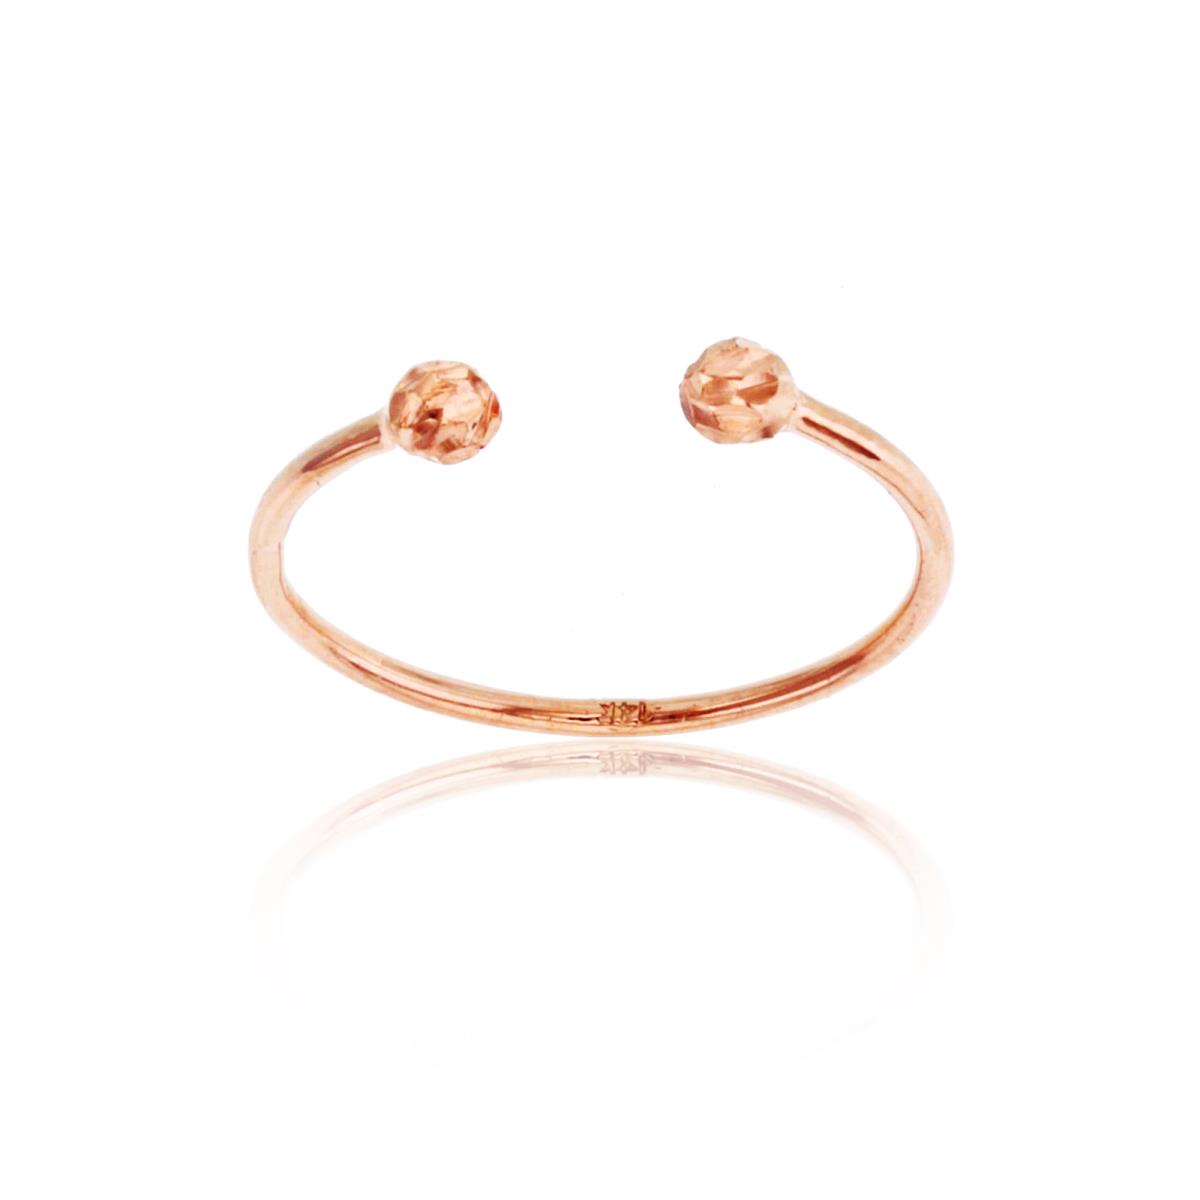 10K Rose Gold 3mm DC Beads on Adjustable Wire Ring